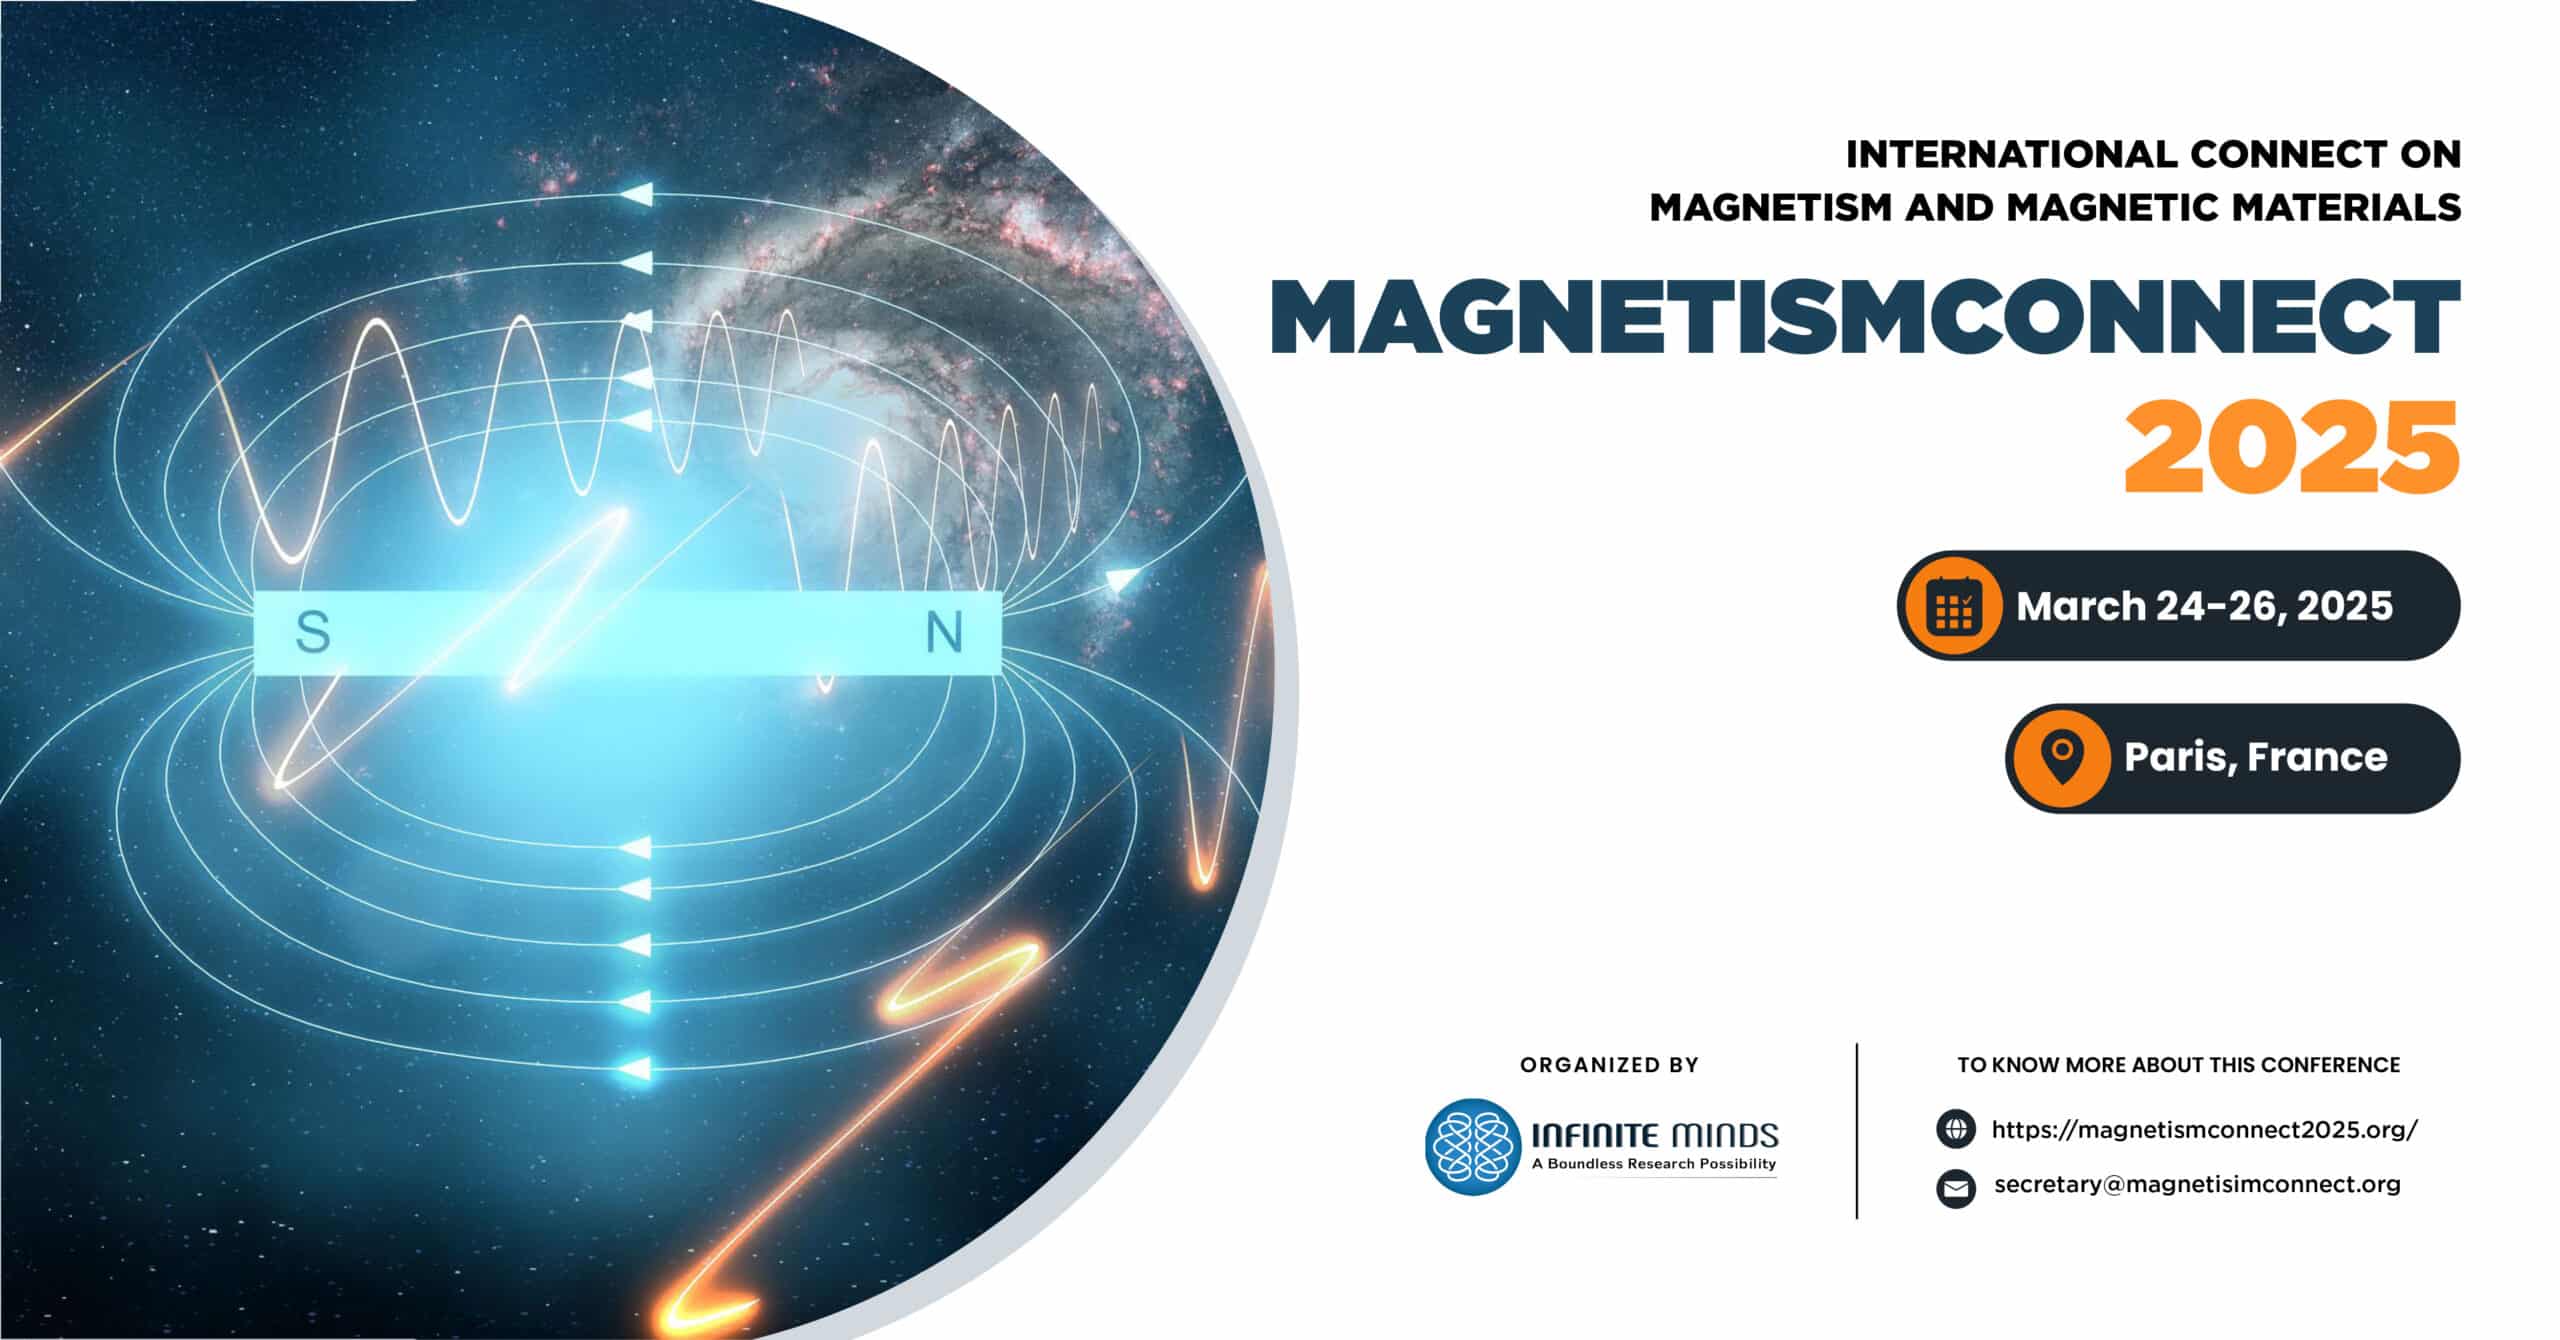 International Connect on Magnetism and Magnetic Materials